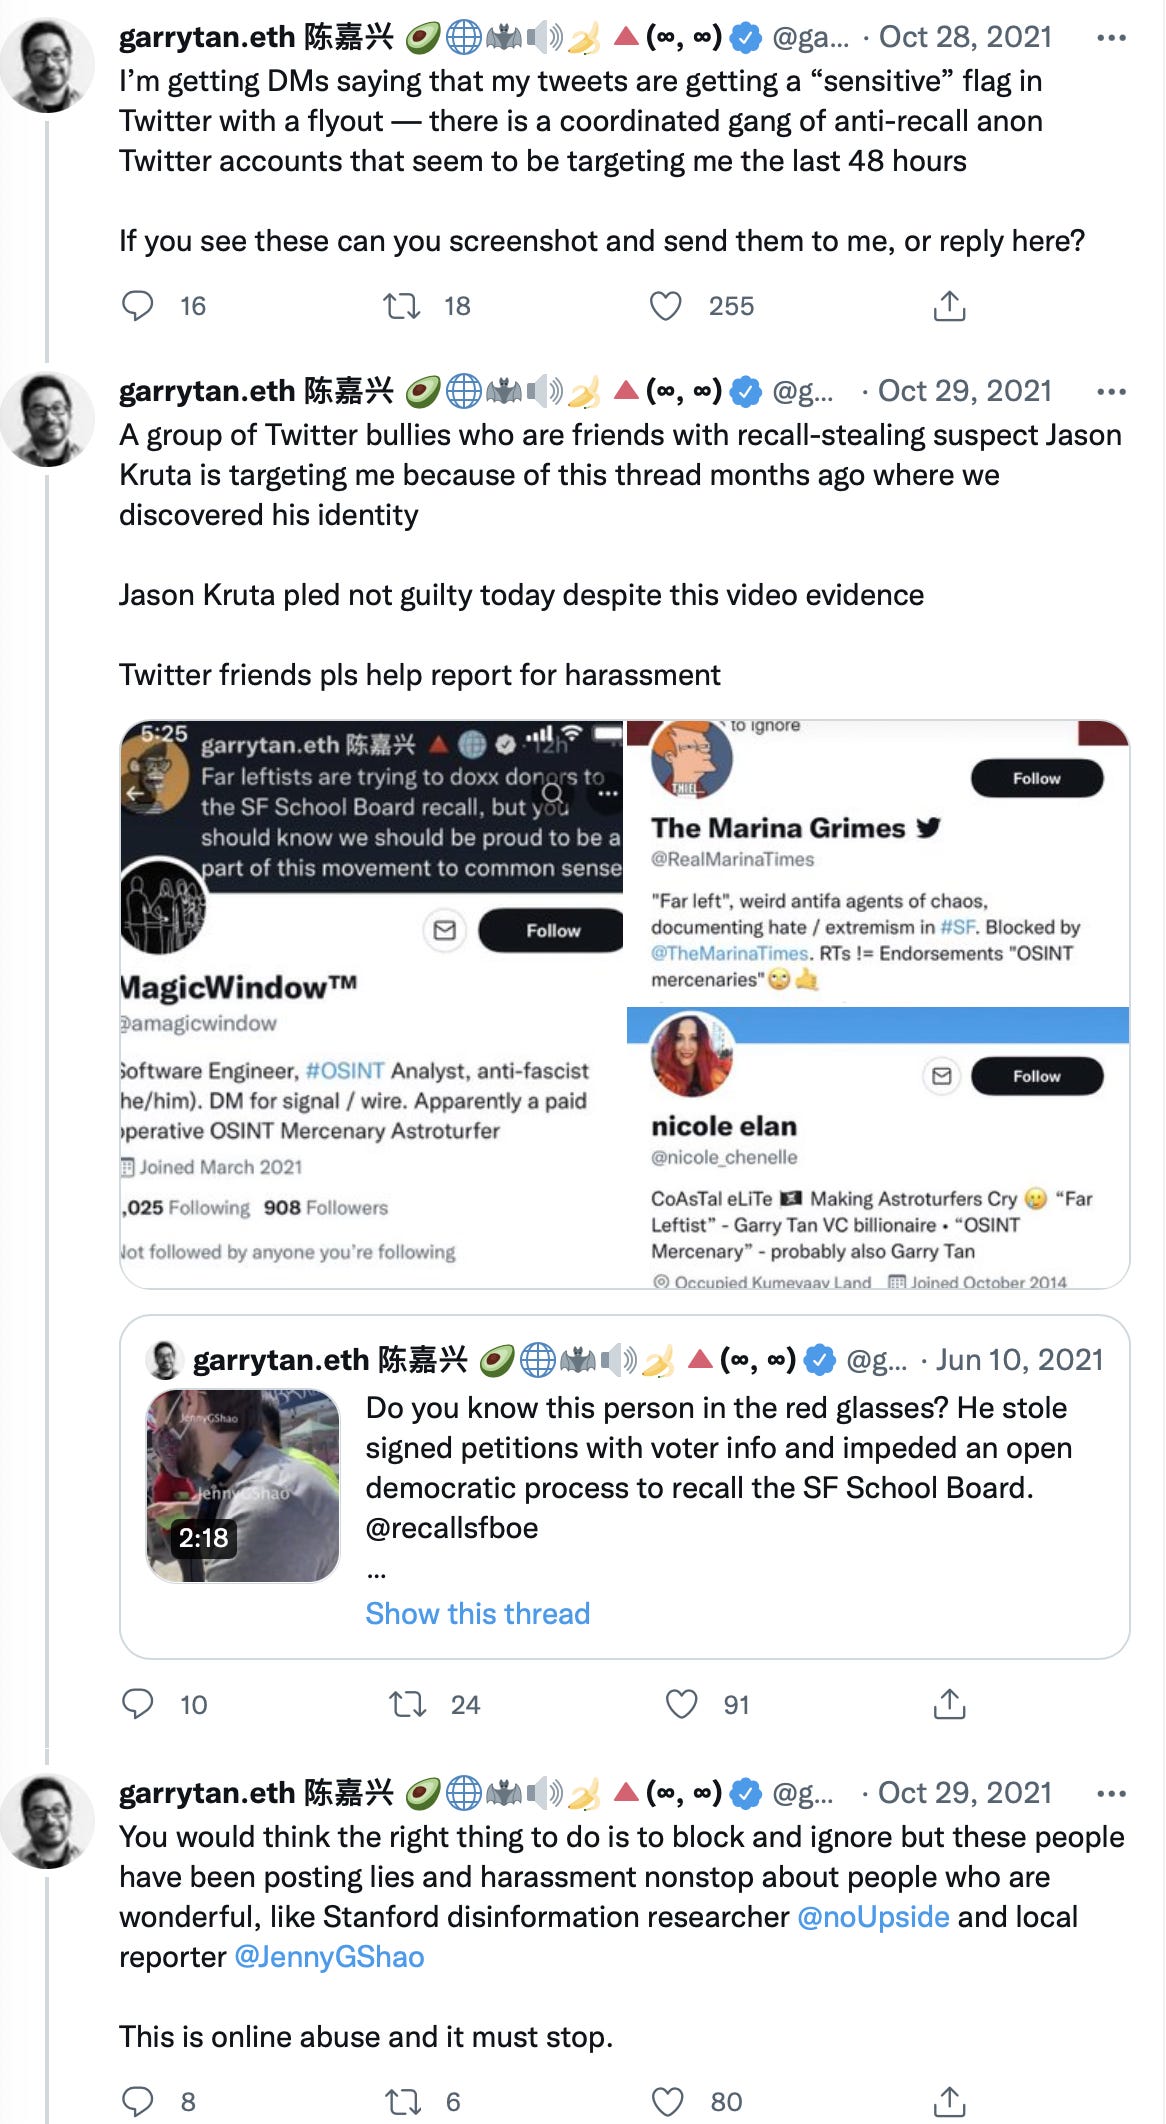 The three accounts shown above in Mr. Tan’s tweet are all connected to the KassandraSeven group.